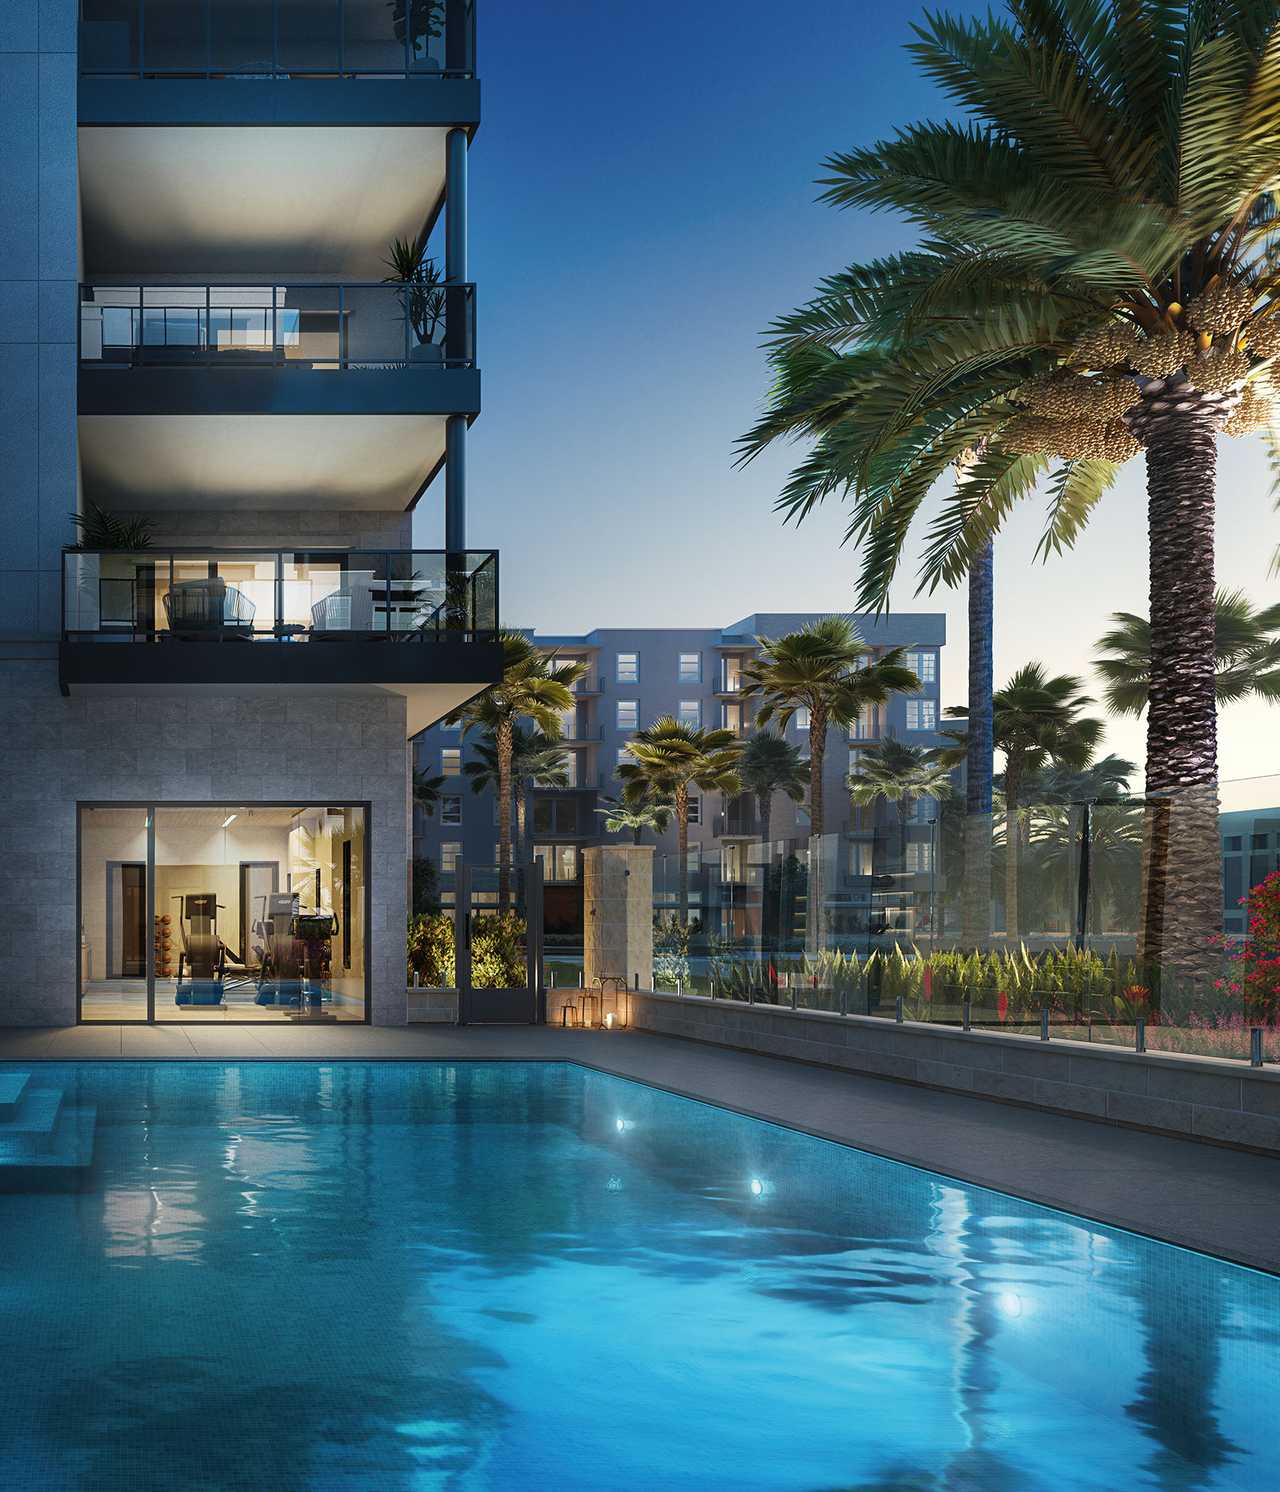 Home Amenities at Parkhouse | Parkhouse Residences Newport Beach